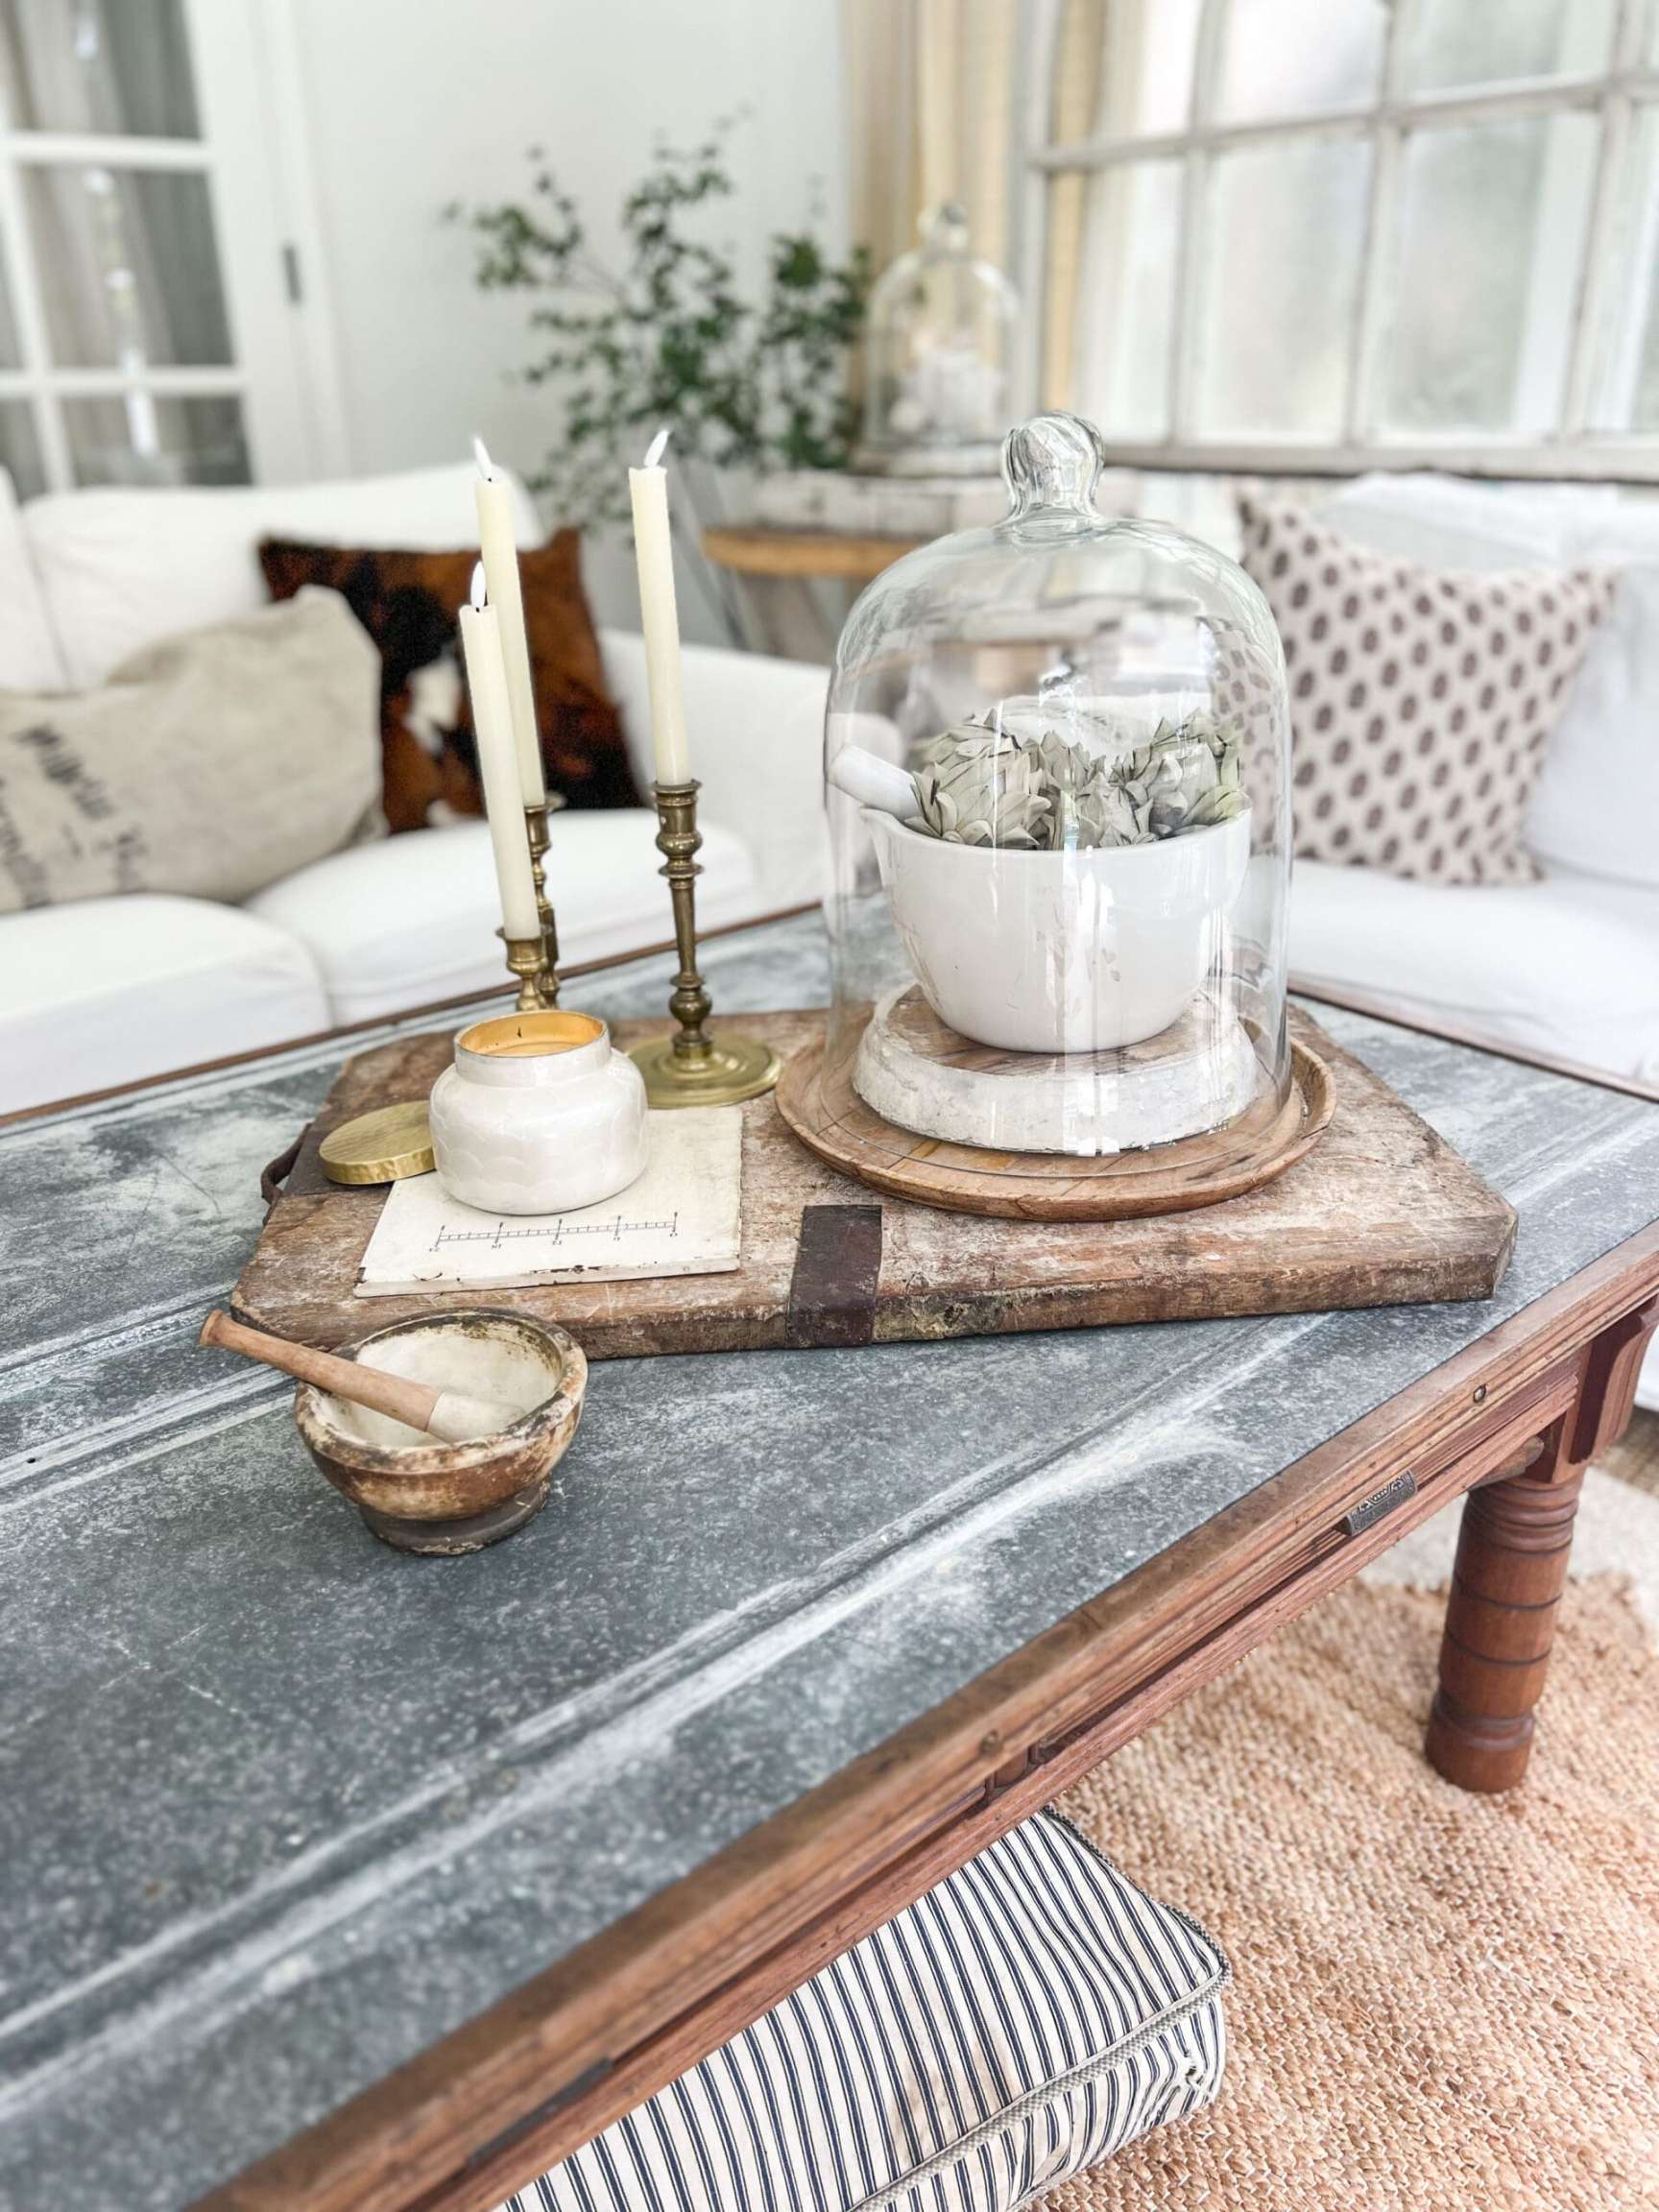 Best Tips for How to Decorate Side and Accent Table Ideas